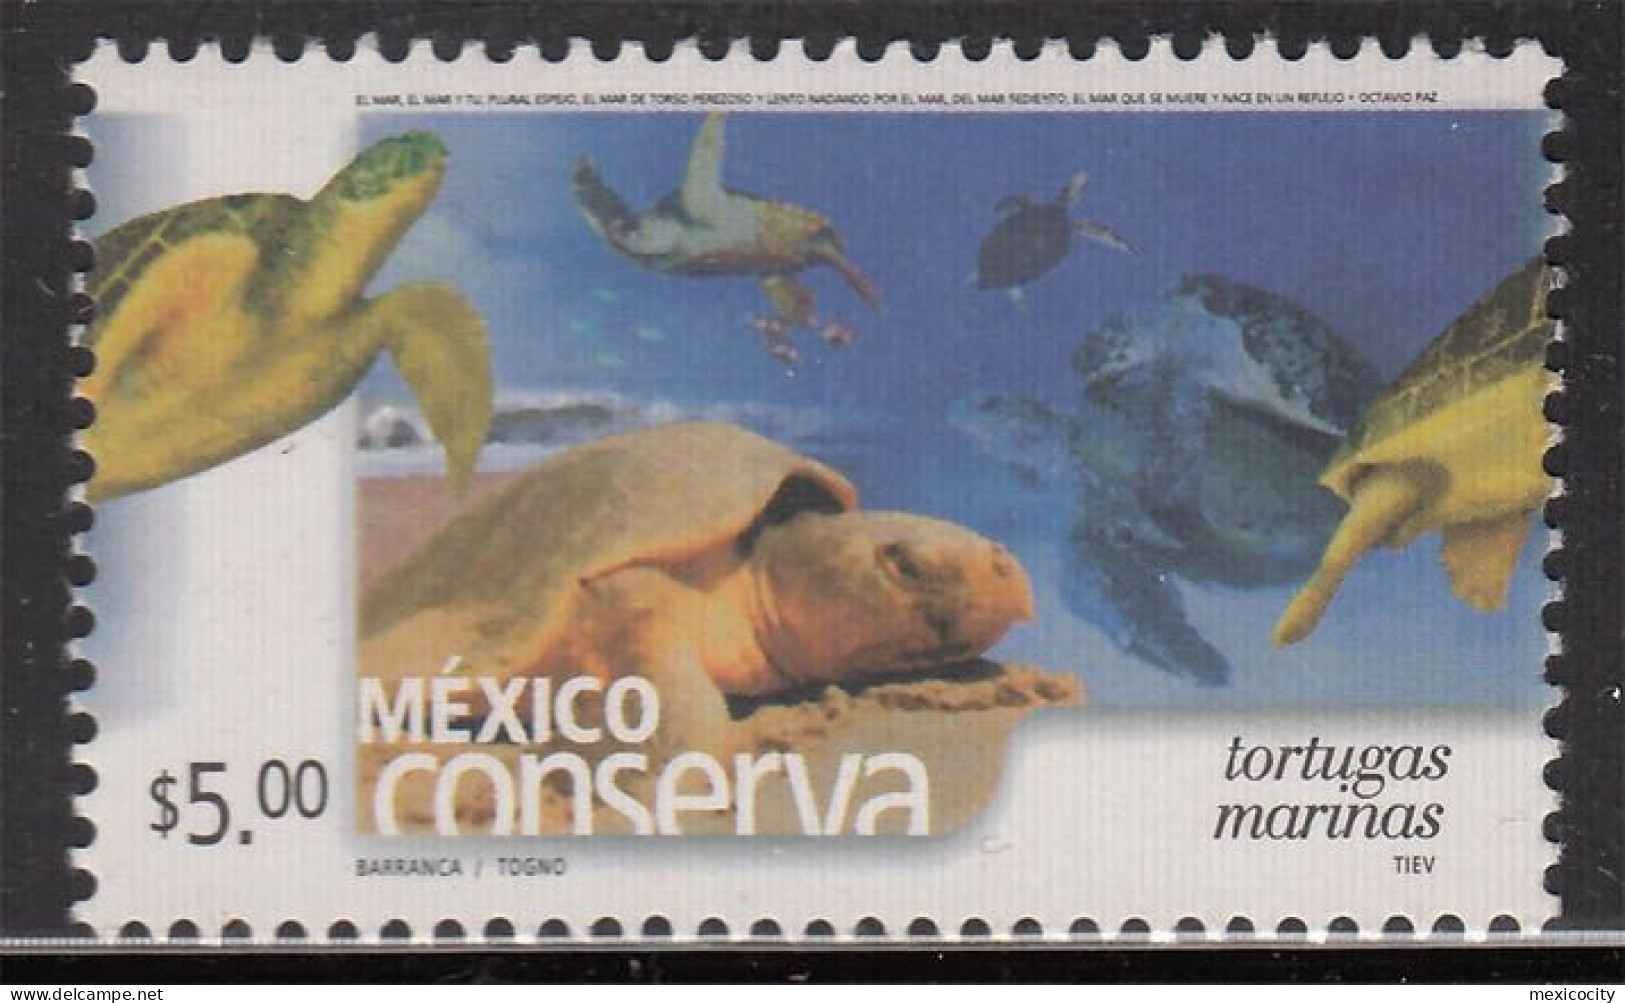 MEXICO 2003 $5 SEA TURTLES Ptg. Perf. 14 On Thick Paper, MNH, Nice Bargain Priced Junk - Mexico